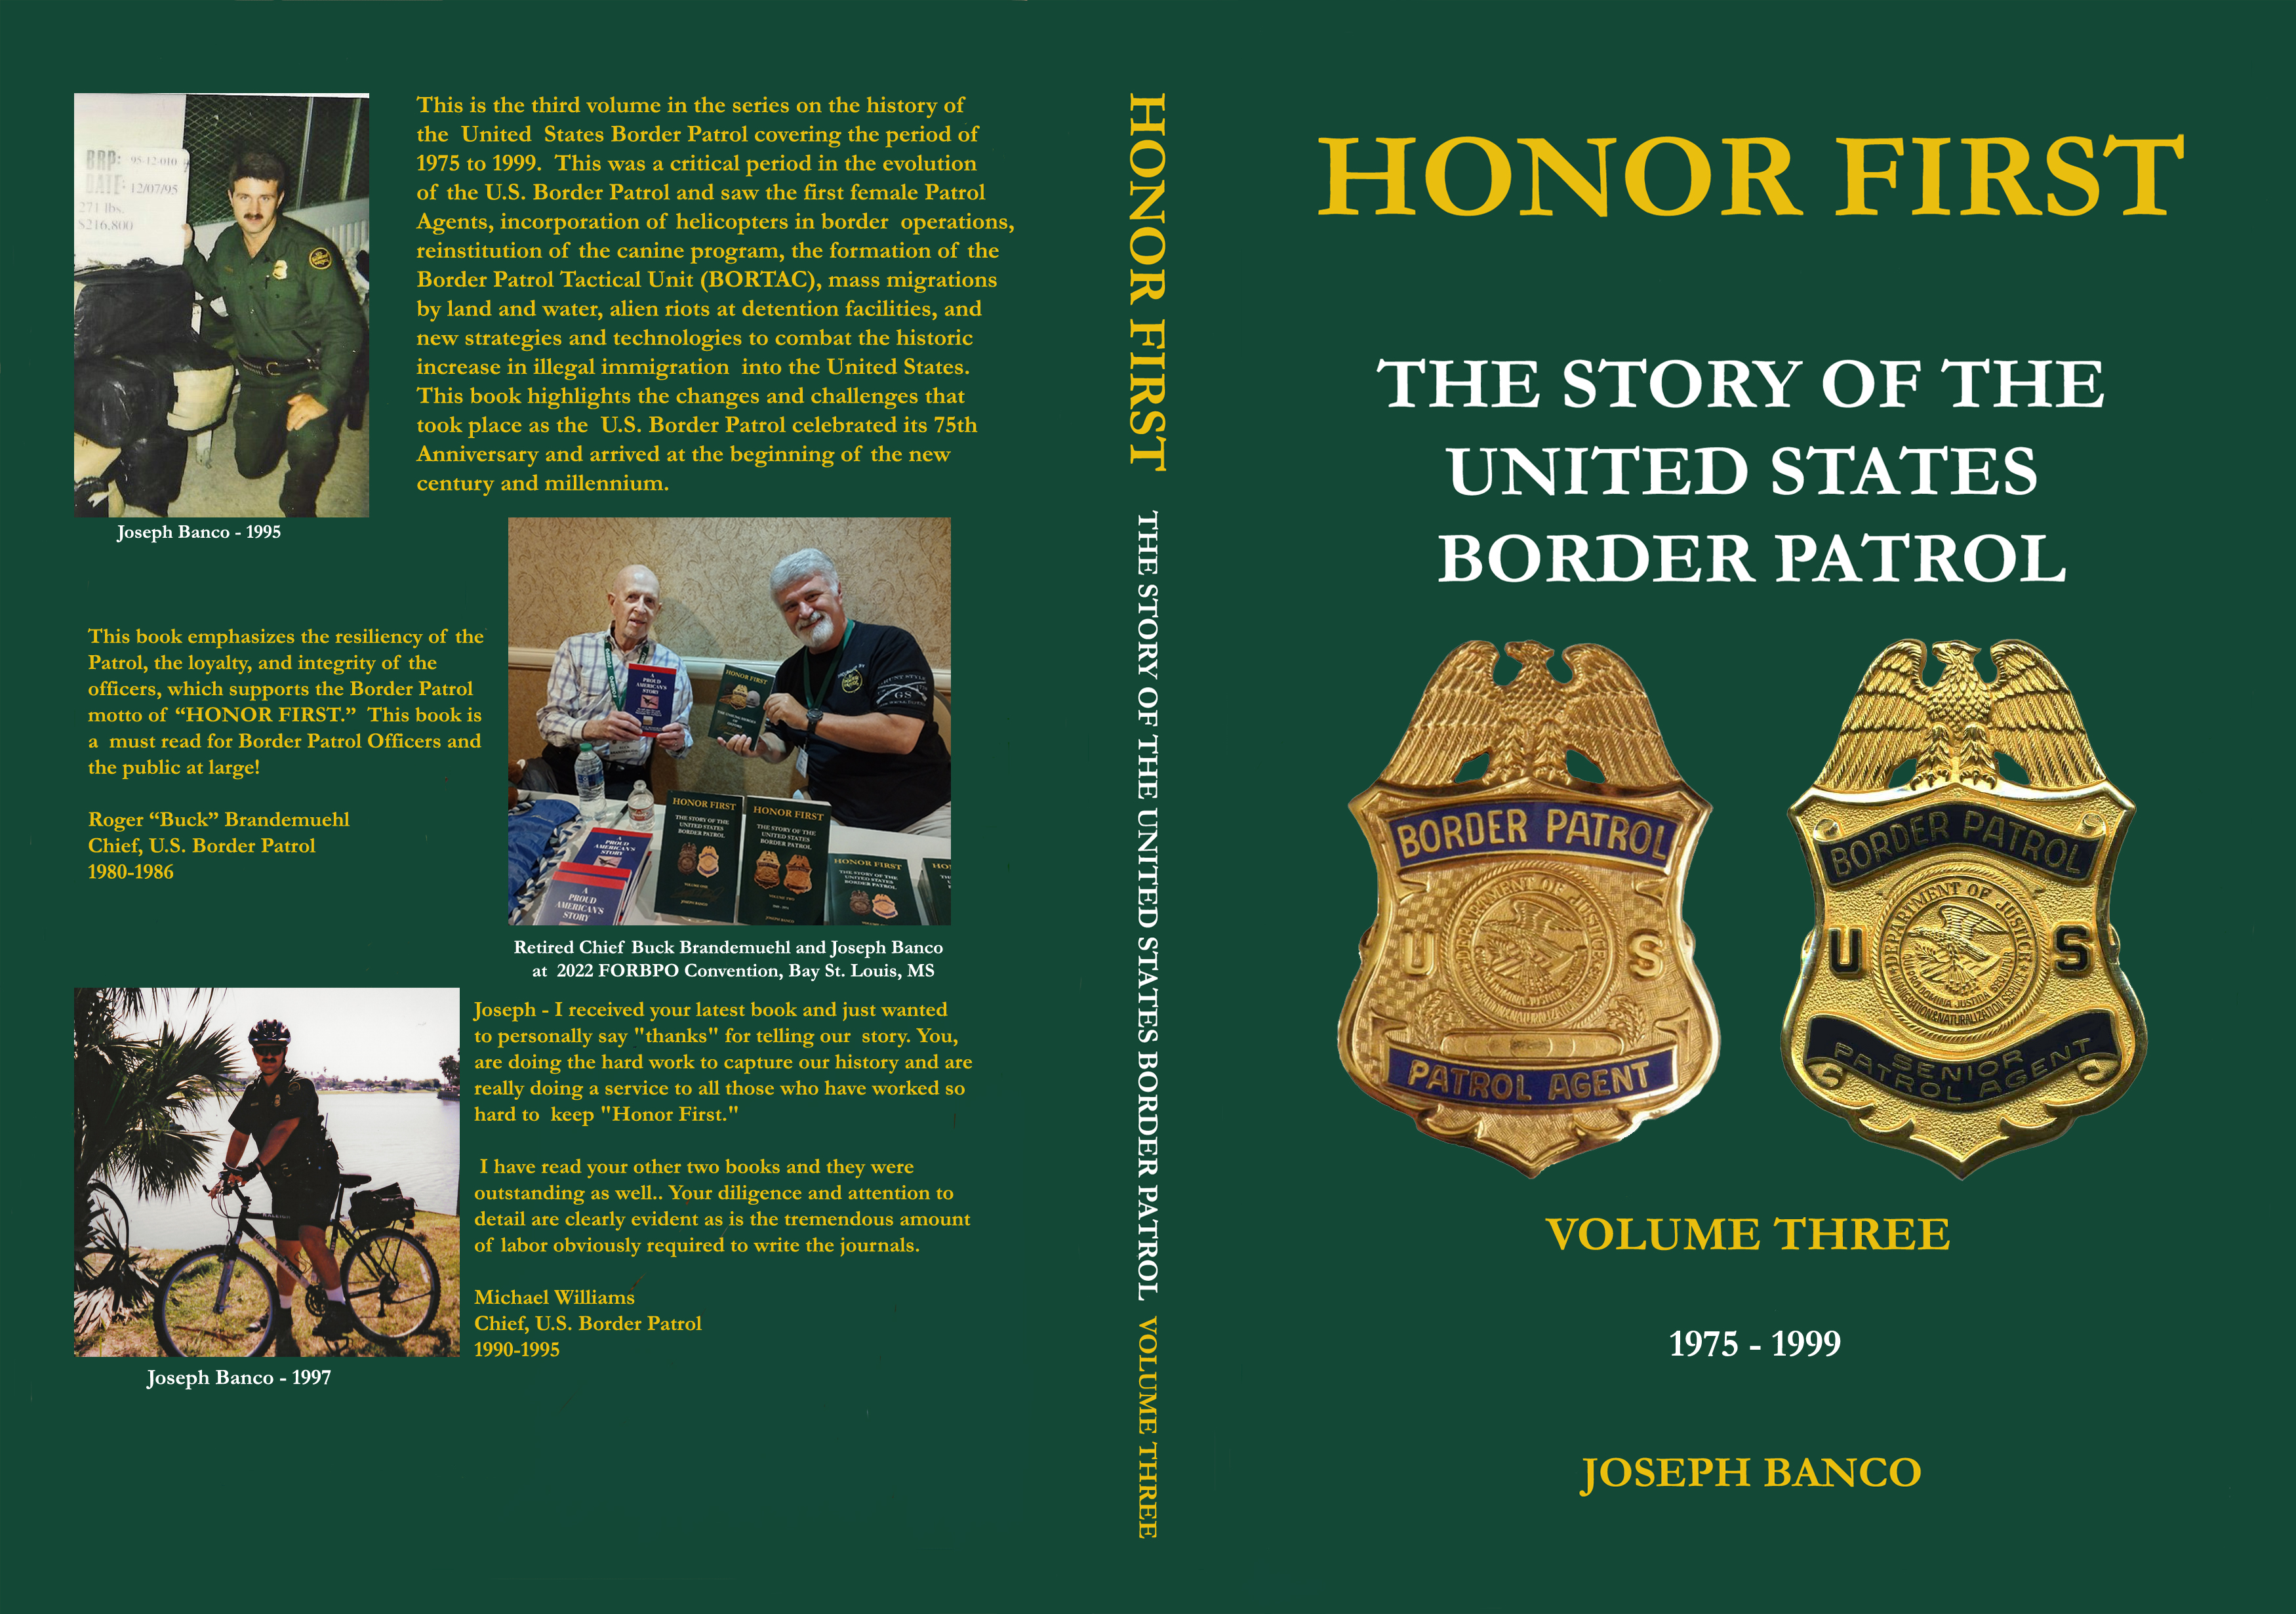 Volume III: HONOR FIRST - The Story of the U.S. Border Patrol (1975-1999)